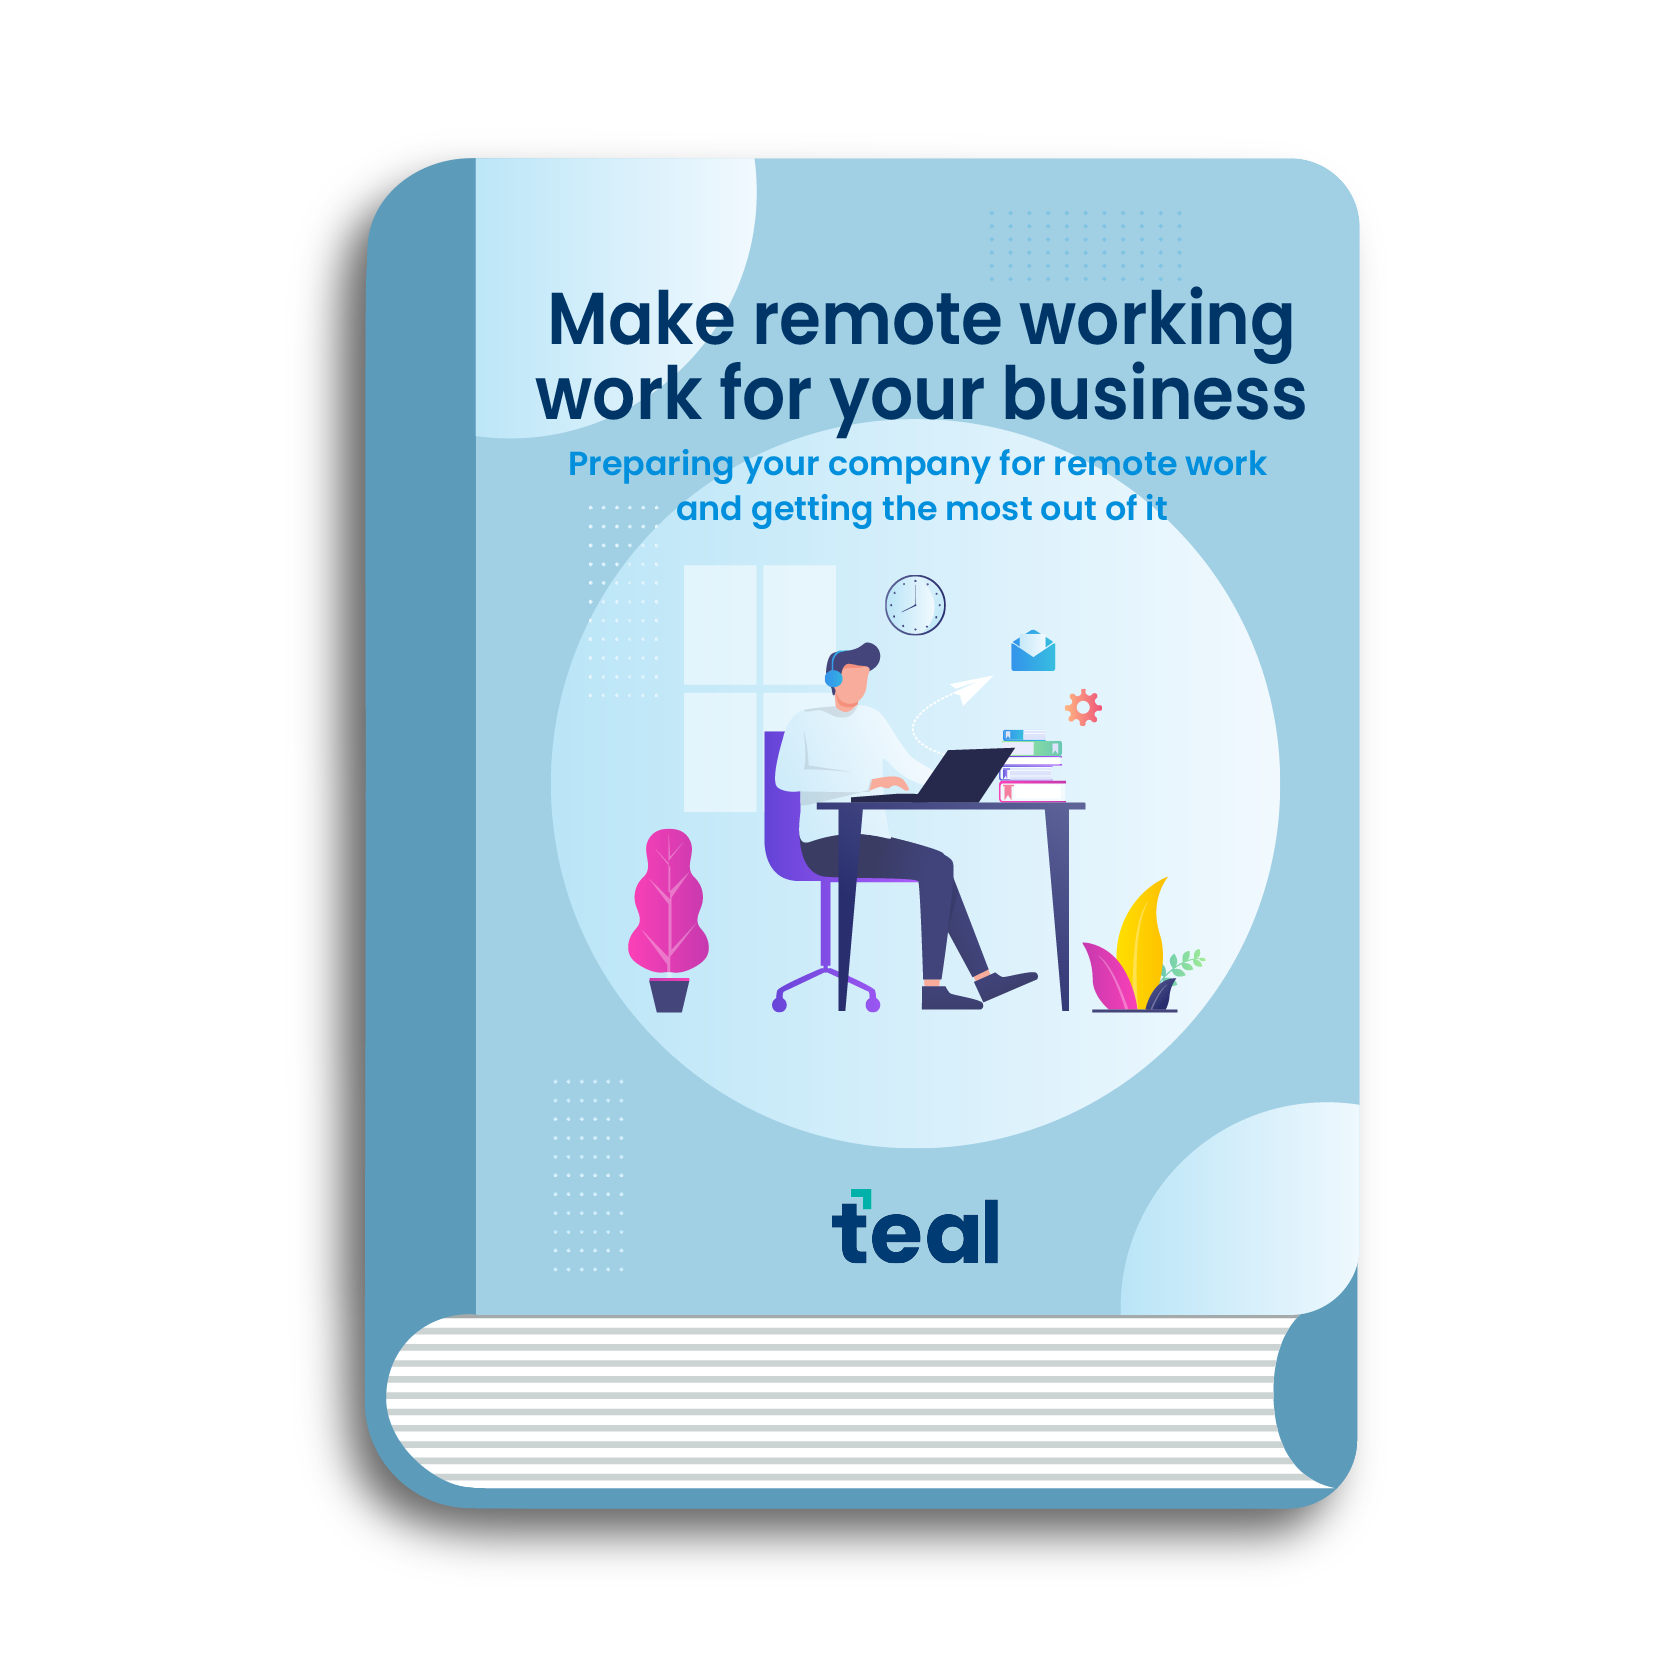 Discover how you can maximize remote work productivity while enhancing data security.